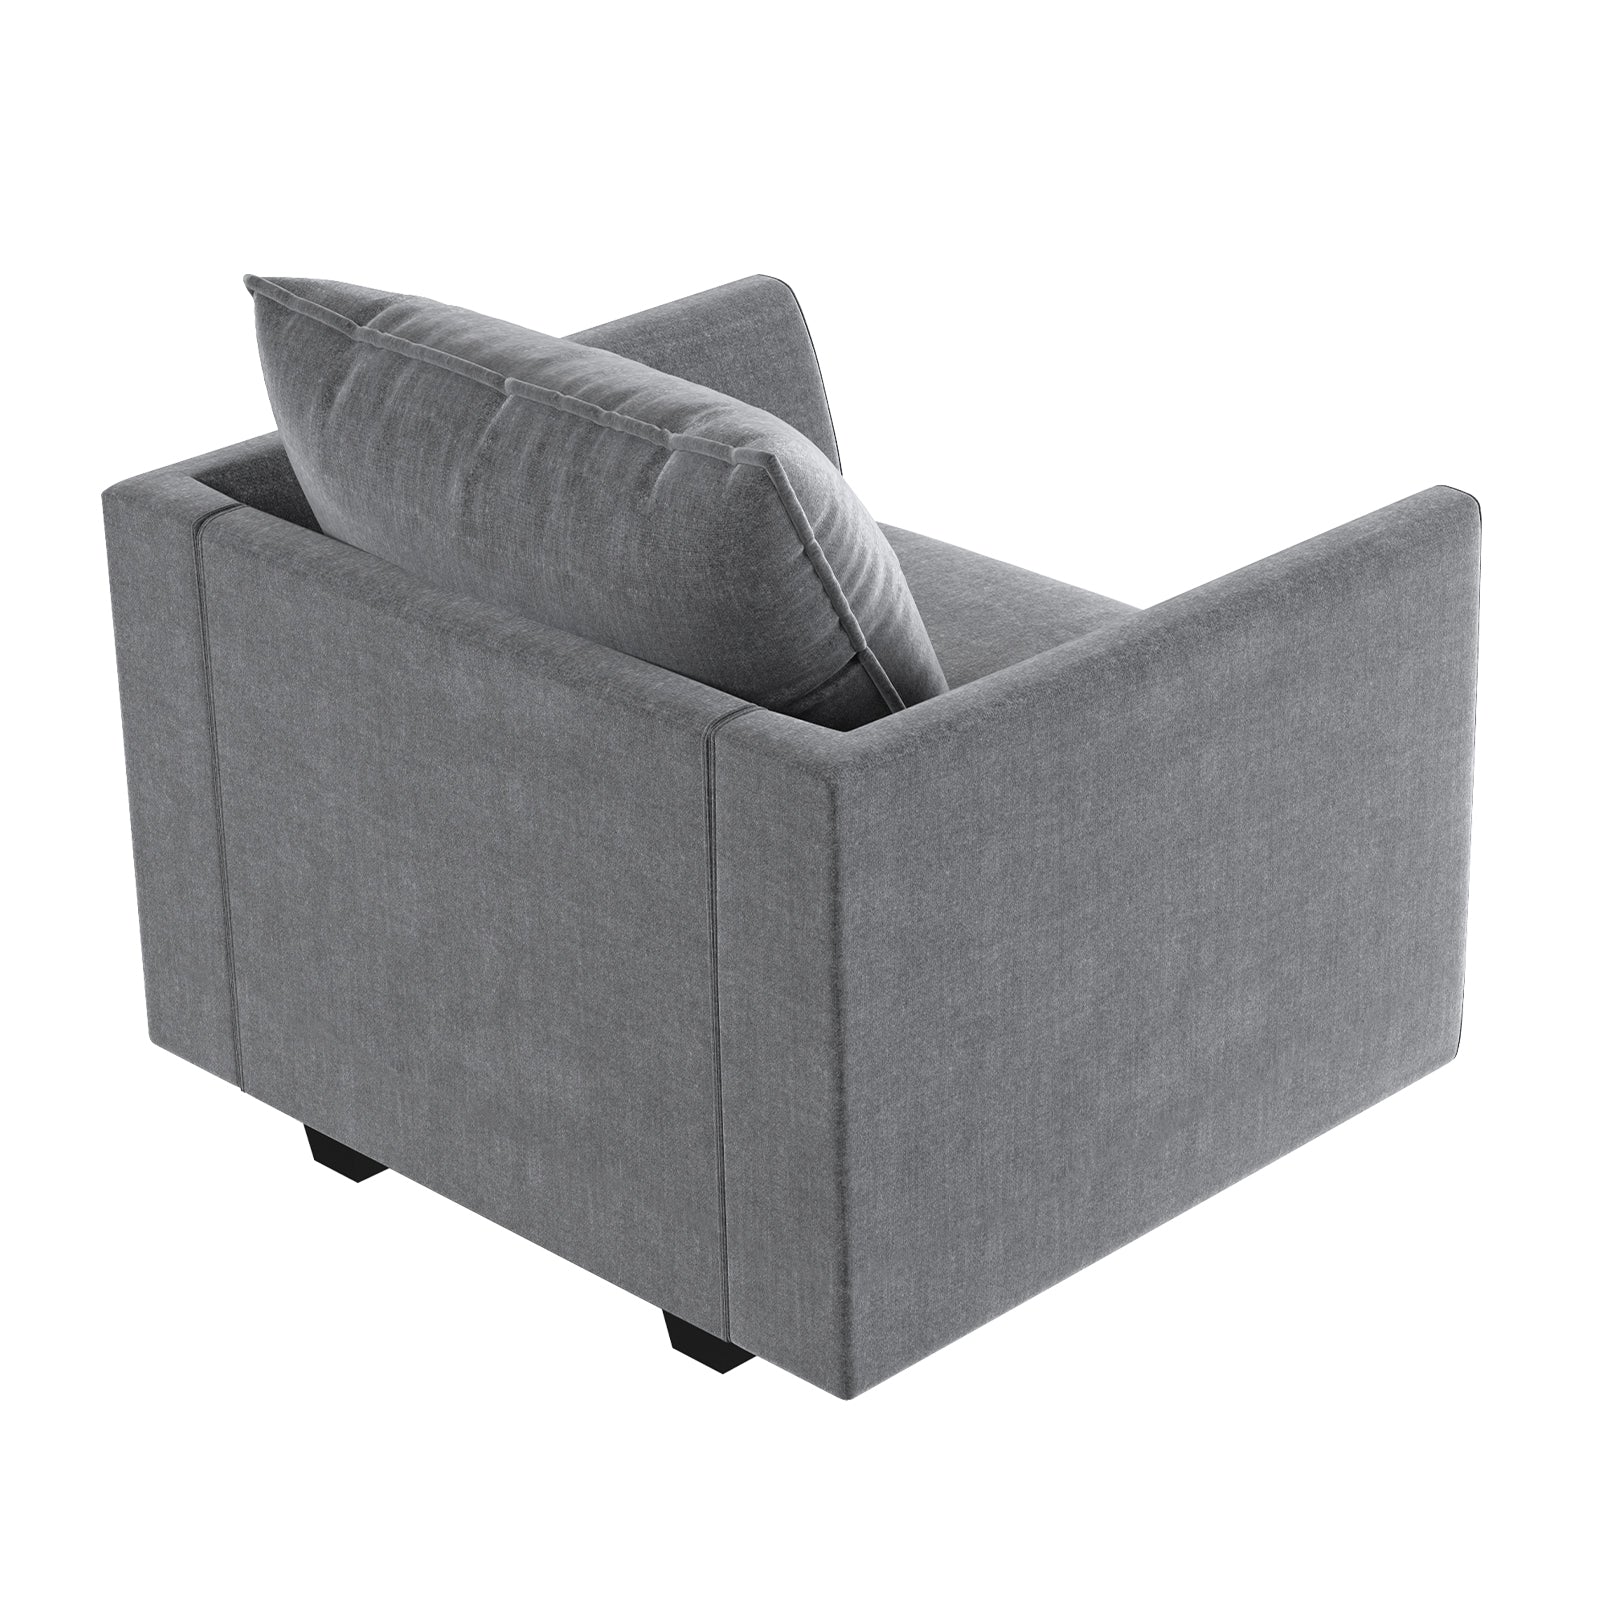 Single Sofa Storage Armseat for Small Space